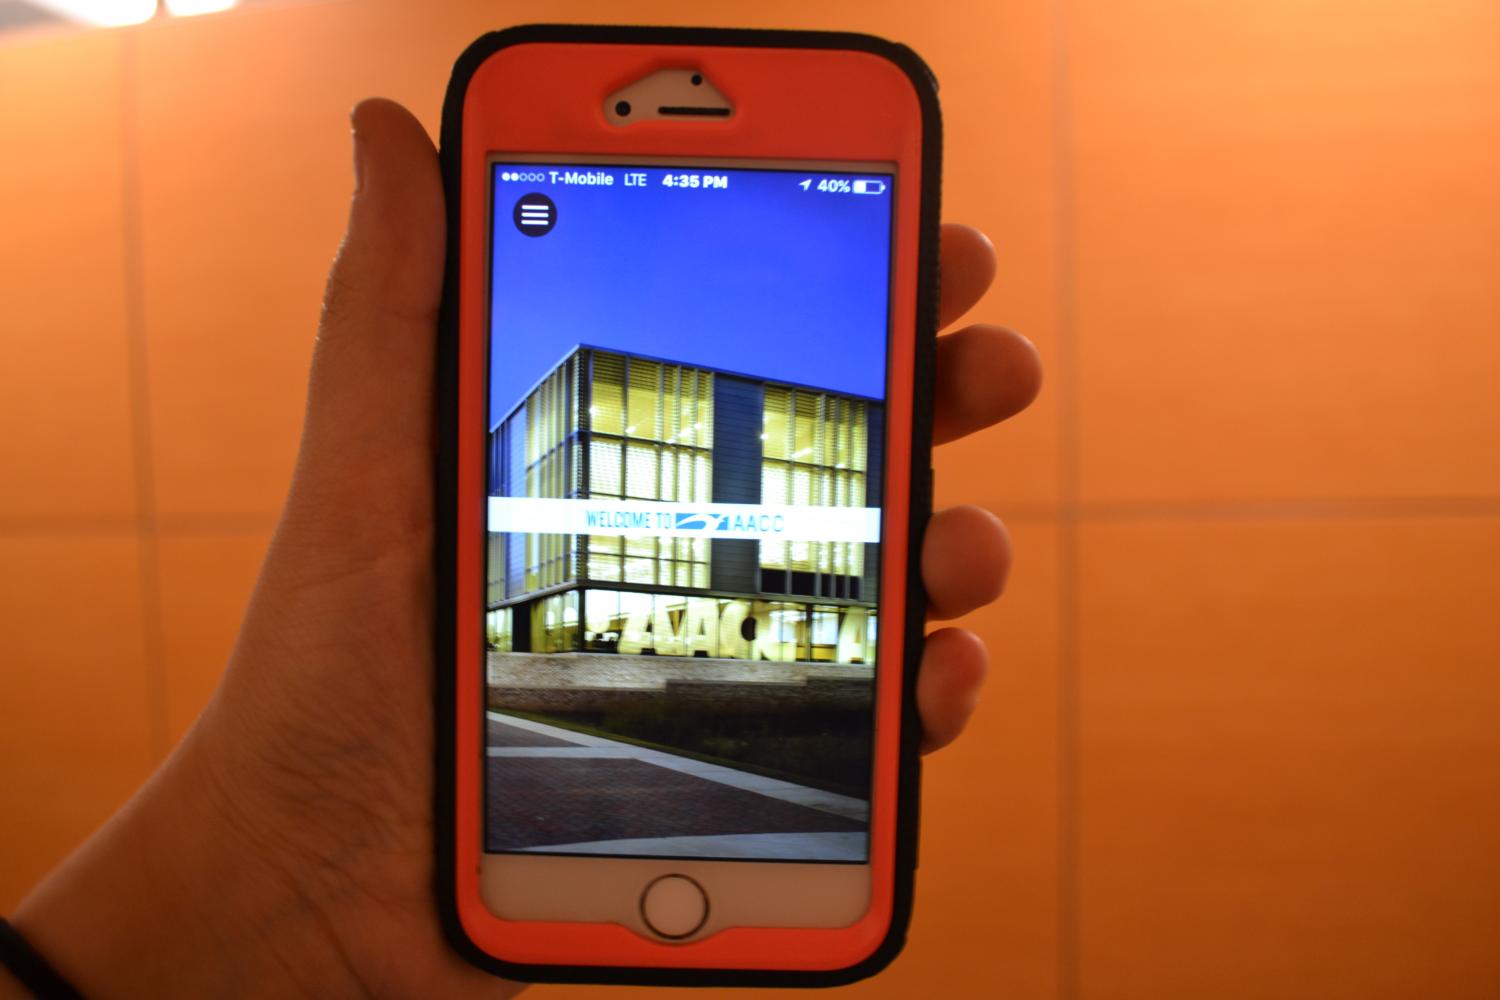 Campus police to place number on AACC app